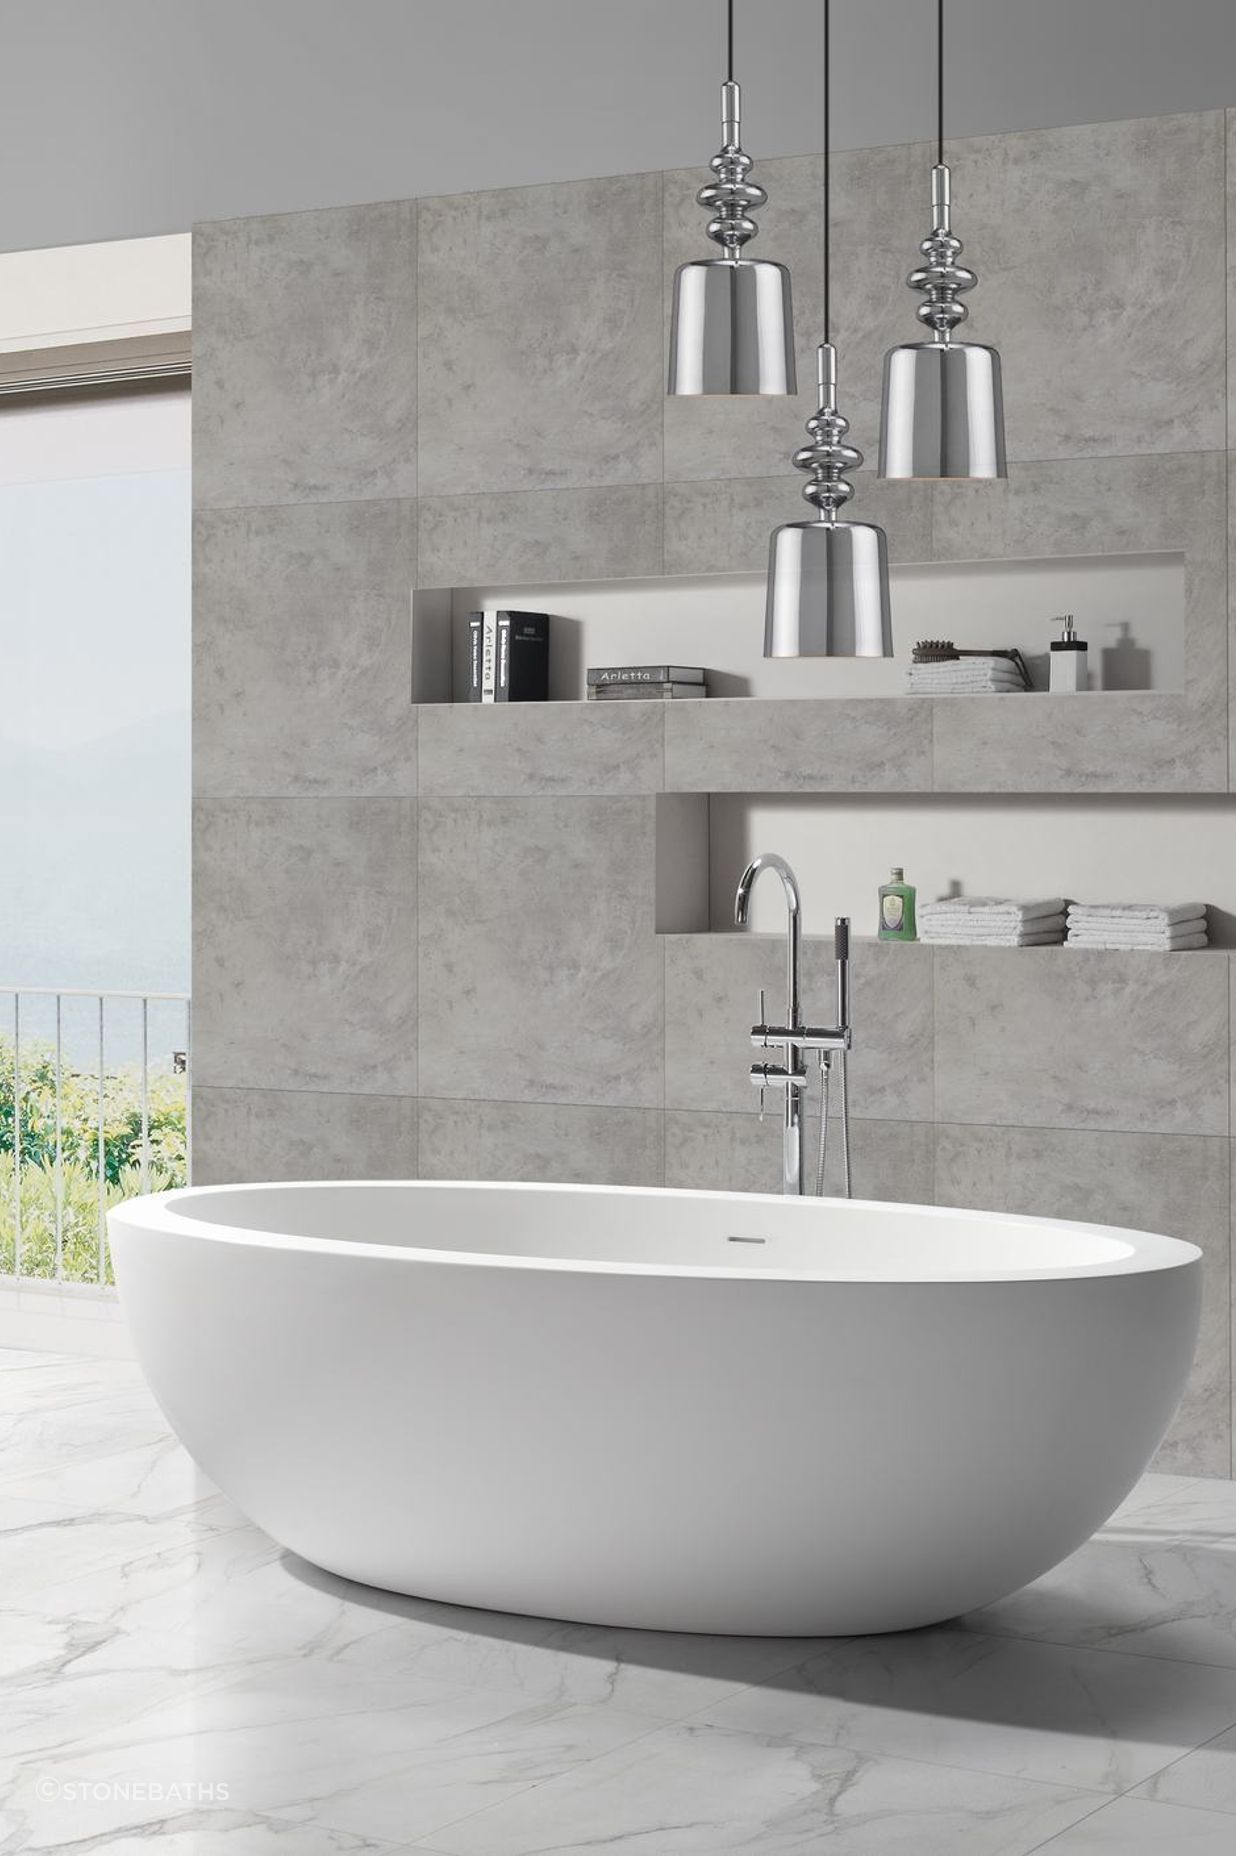 Freestanding baths are a great way to maximise space in a bathroom.